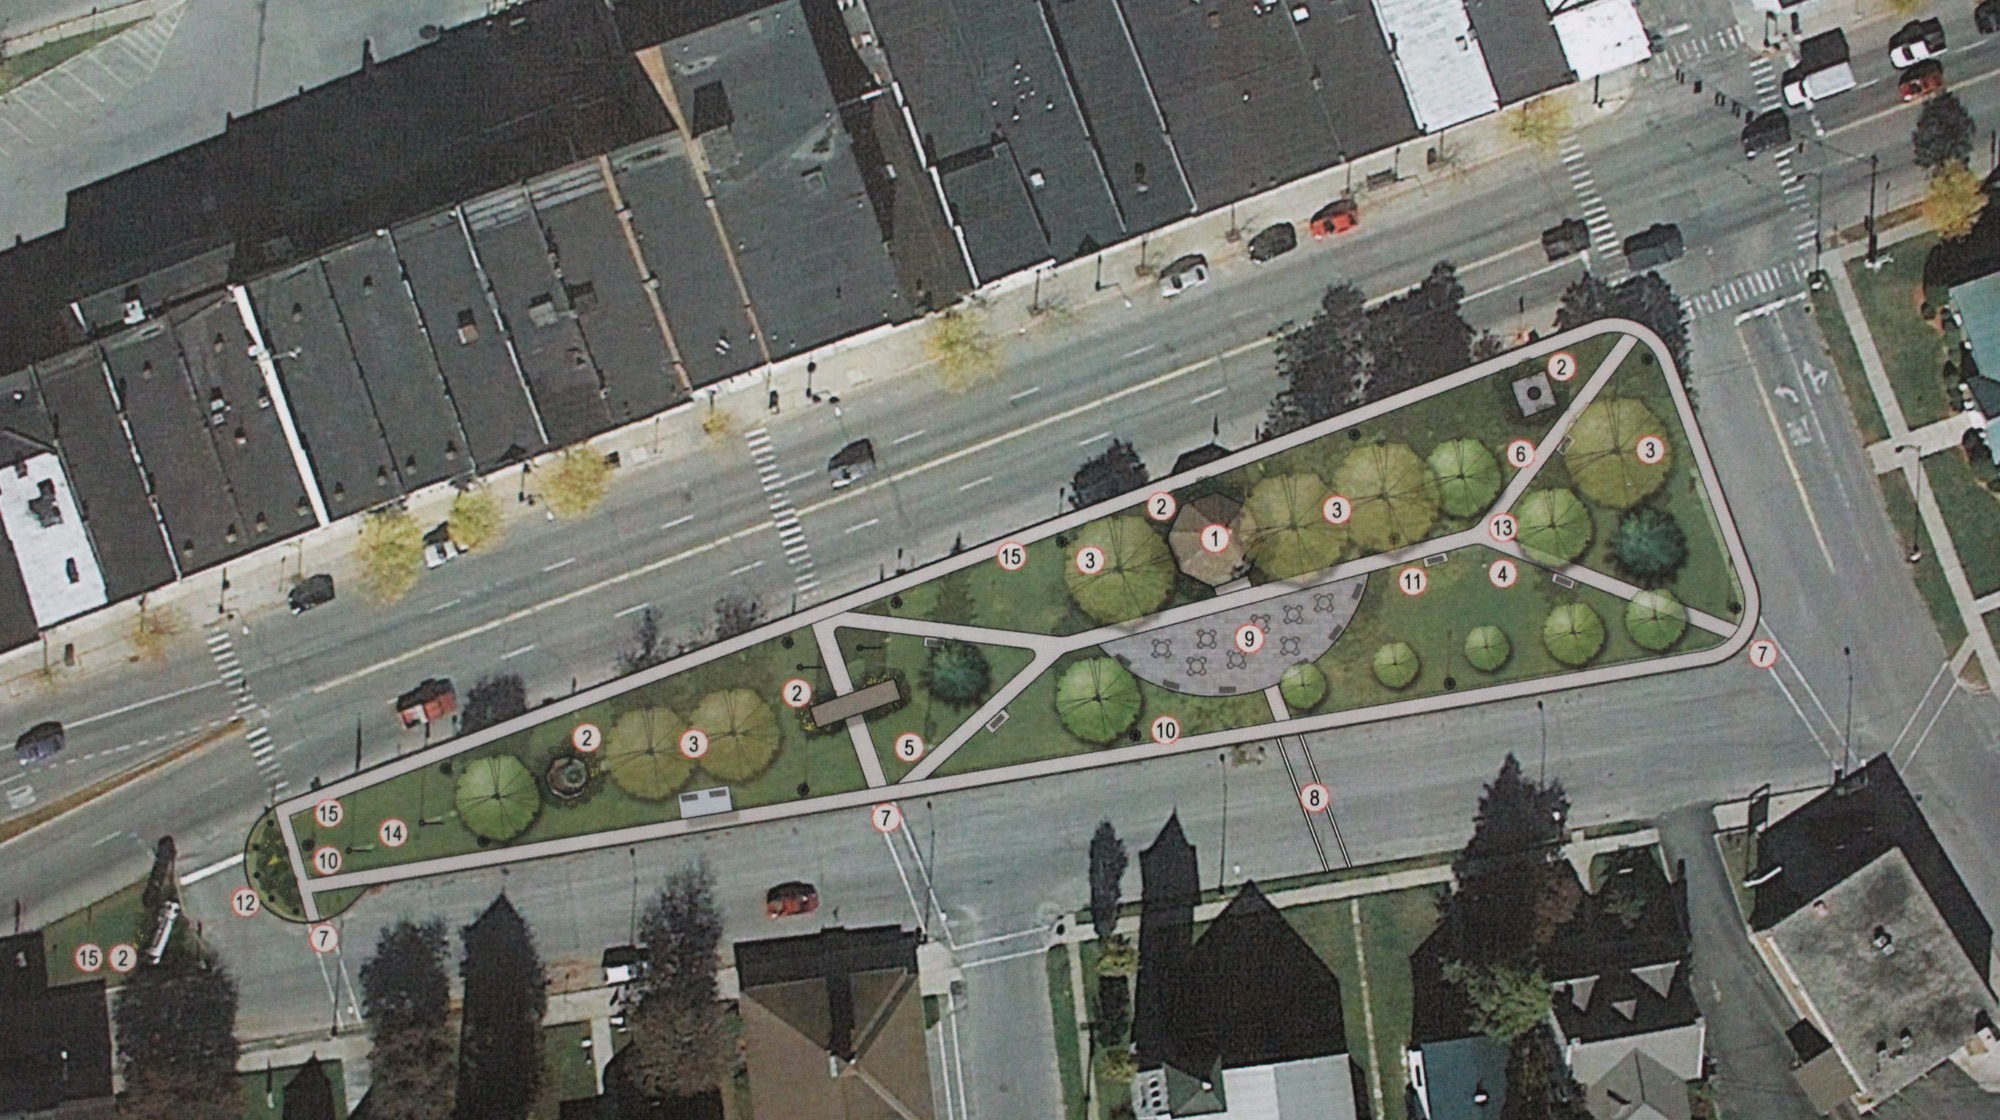 13 recommendations made for improvements at intersection of